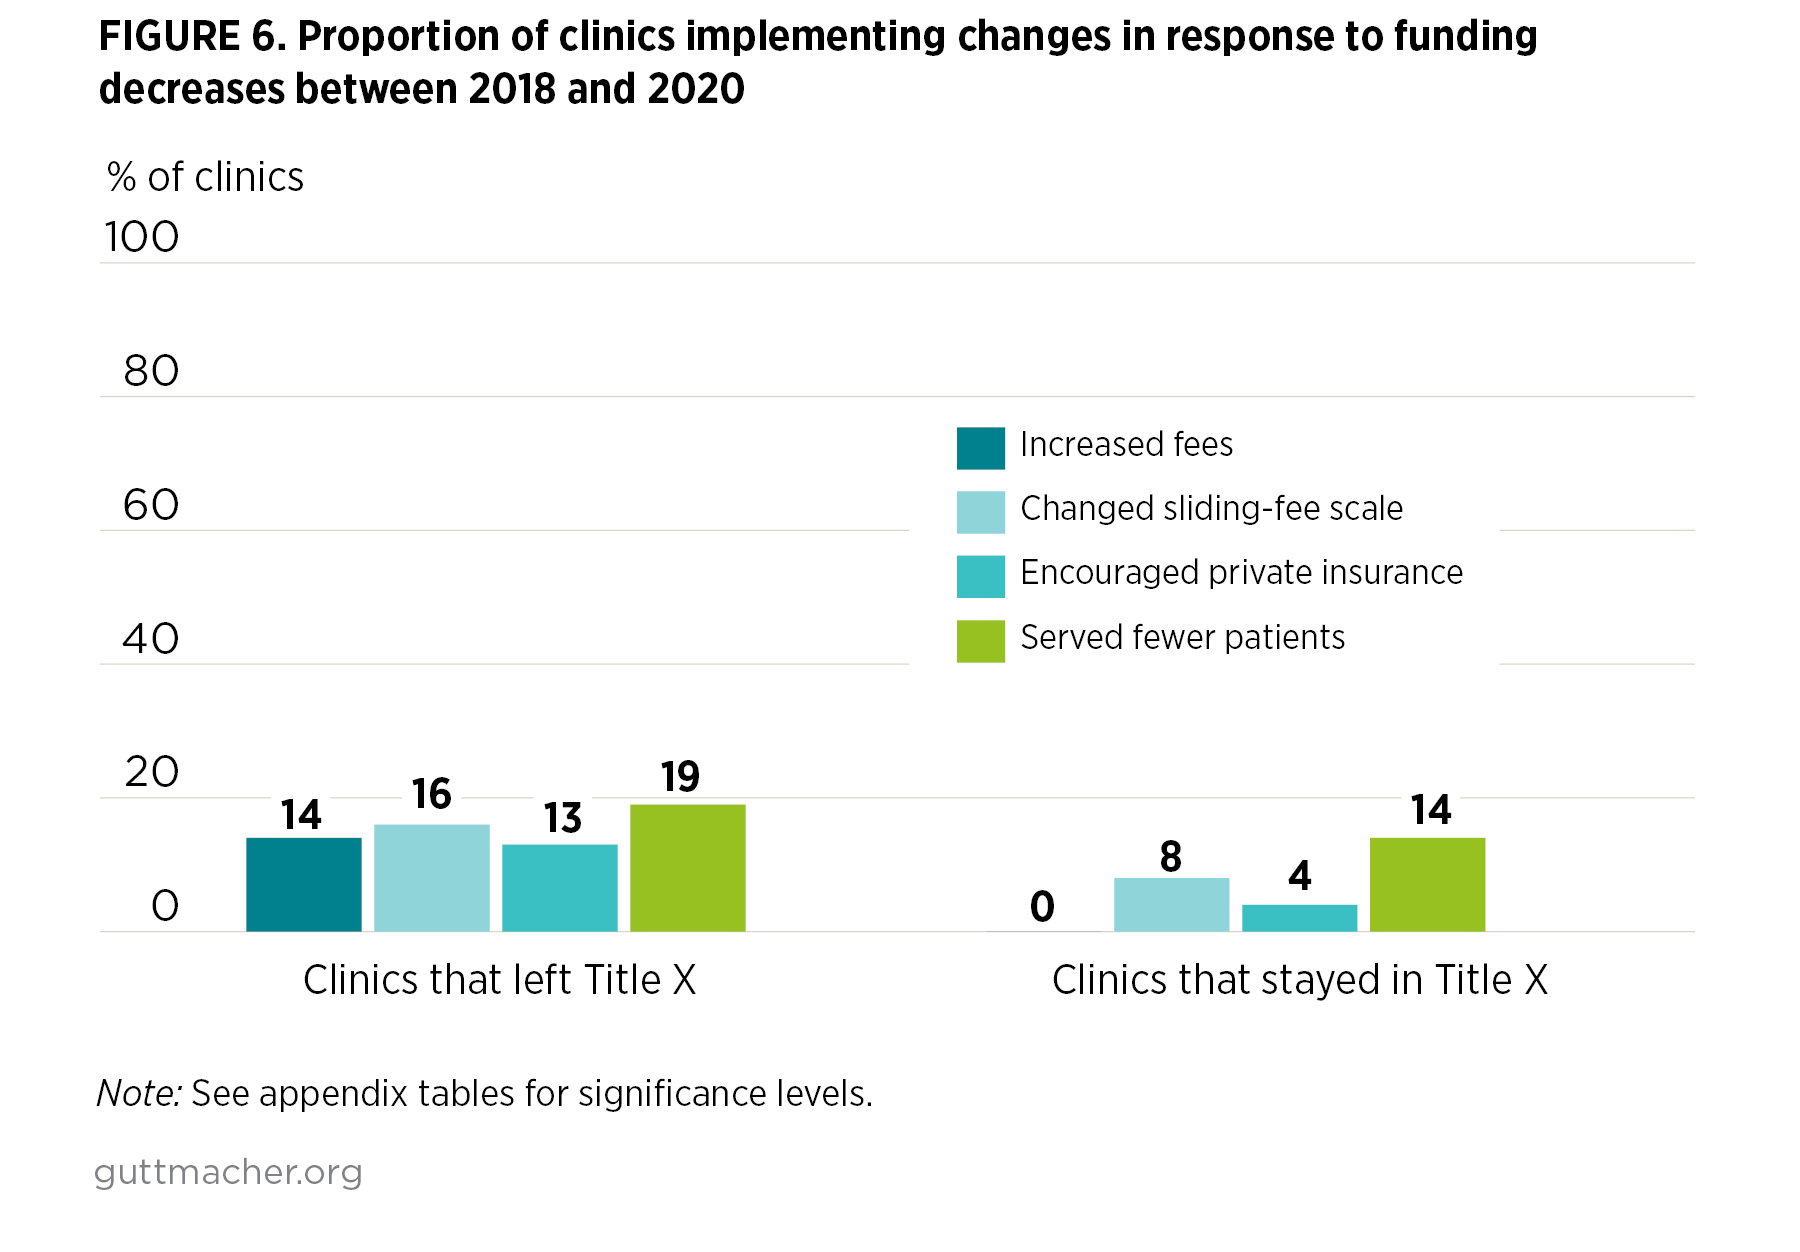 Bar chart showing Proportion of clinics implementing changes in response to funding decreases between 2018 and 2020